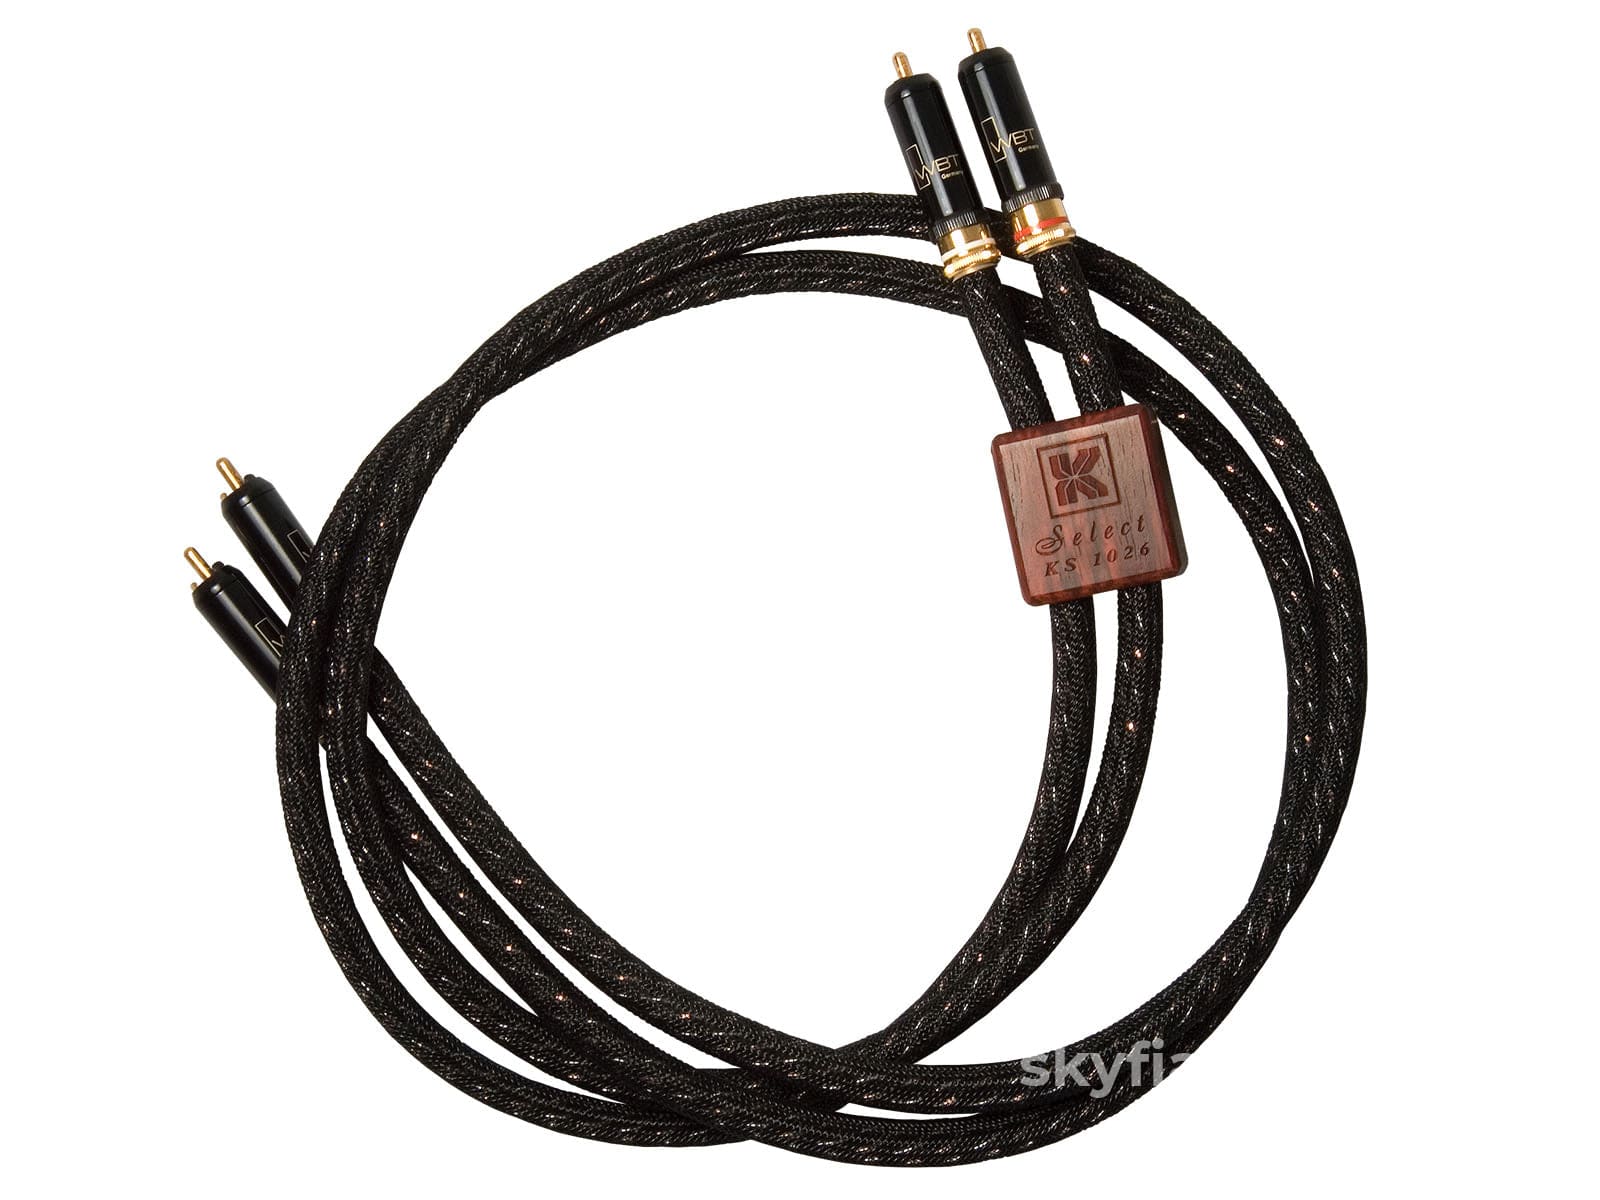 Kimber Kable - Select Series Silver/Copper Rca Interconnects (Pair) Ks1026 Wbt Connectors New Cables